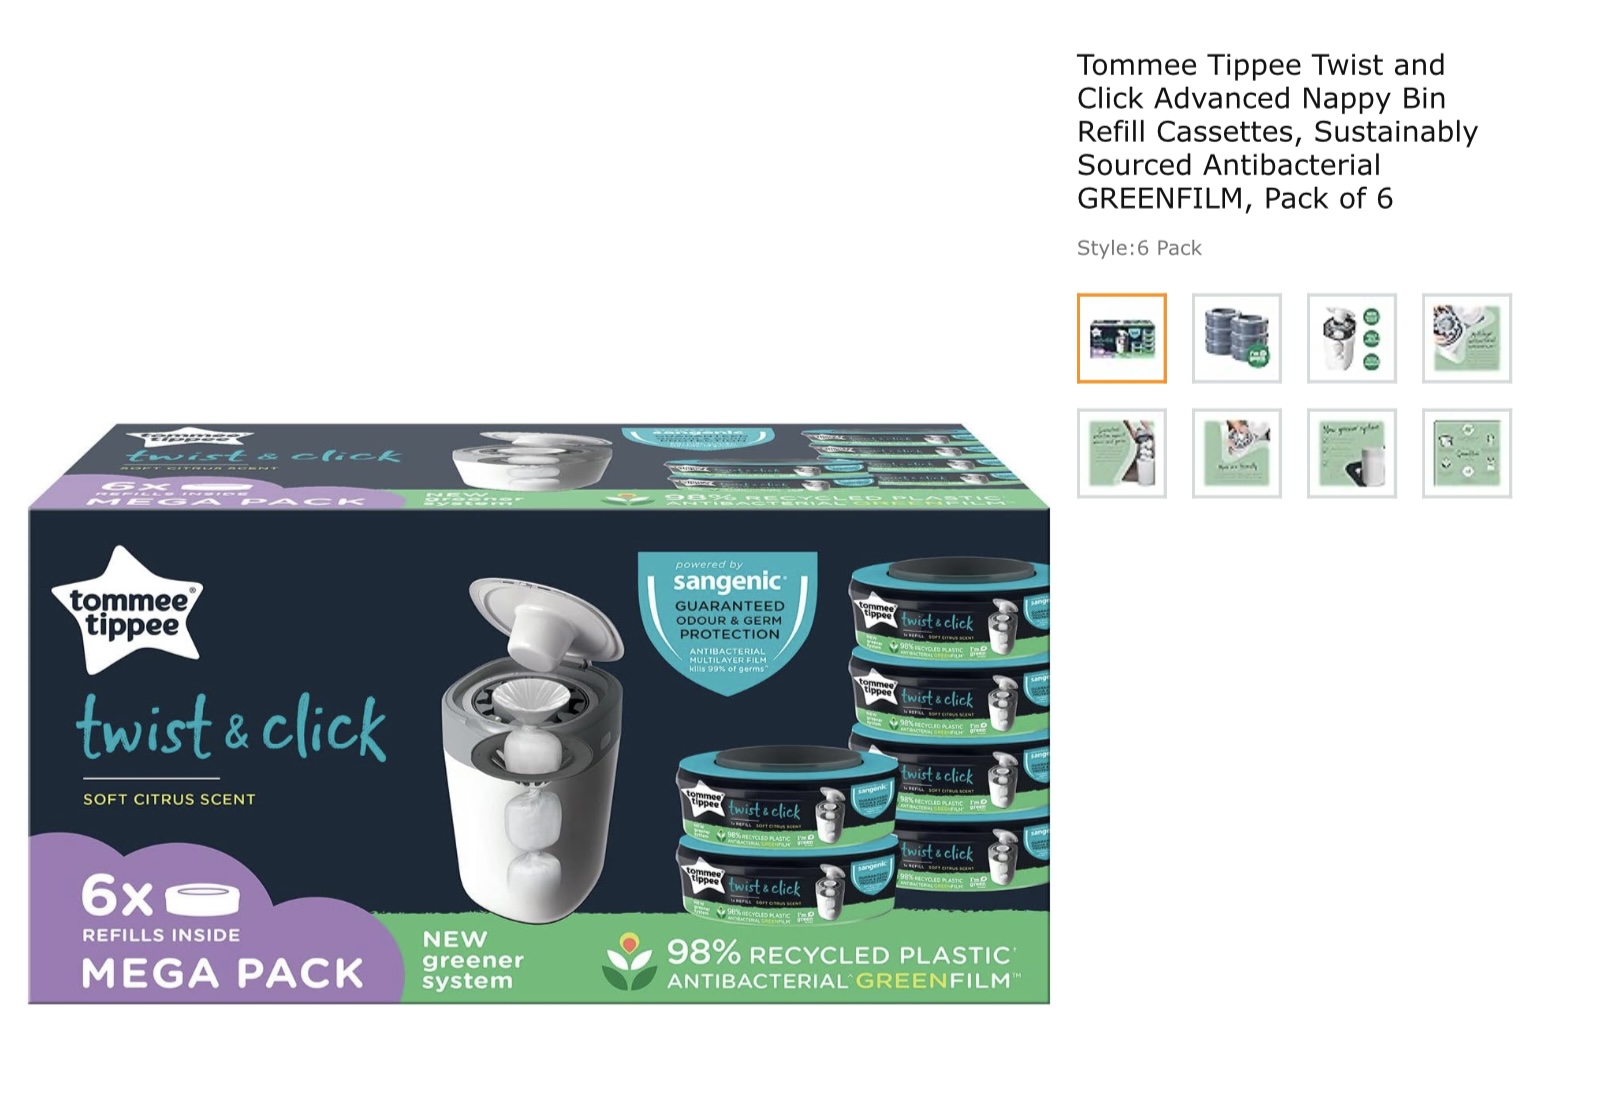 Tommee Tippee Twist and Click Advanced Nappy Bin Refill Cassettes, Sustainably Sourced Antibacterial GREENFILM, Pack of 6